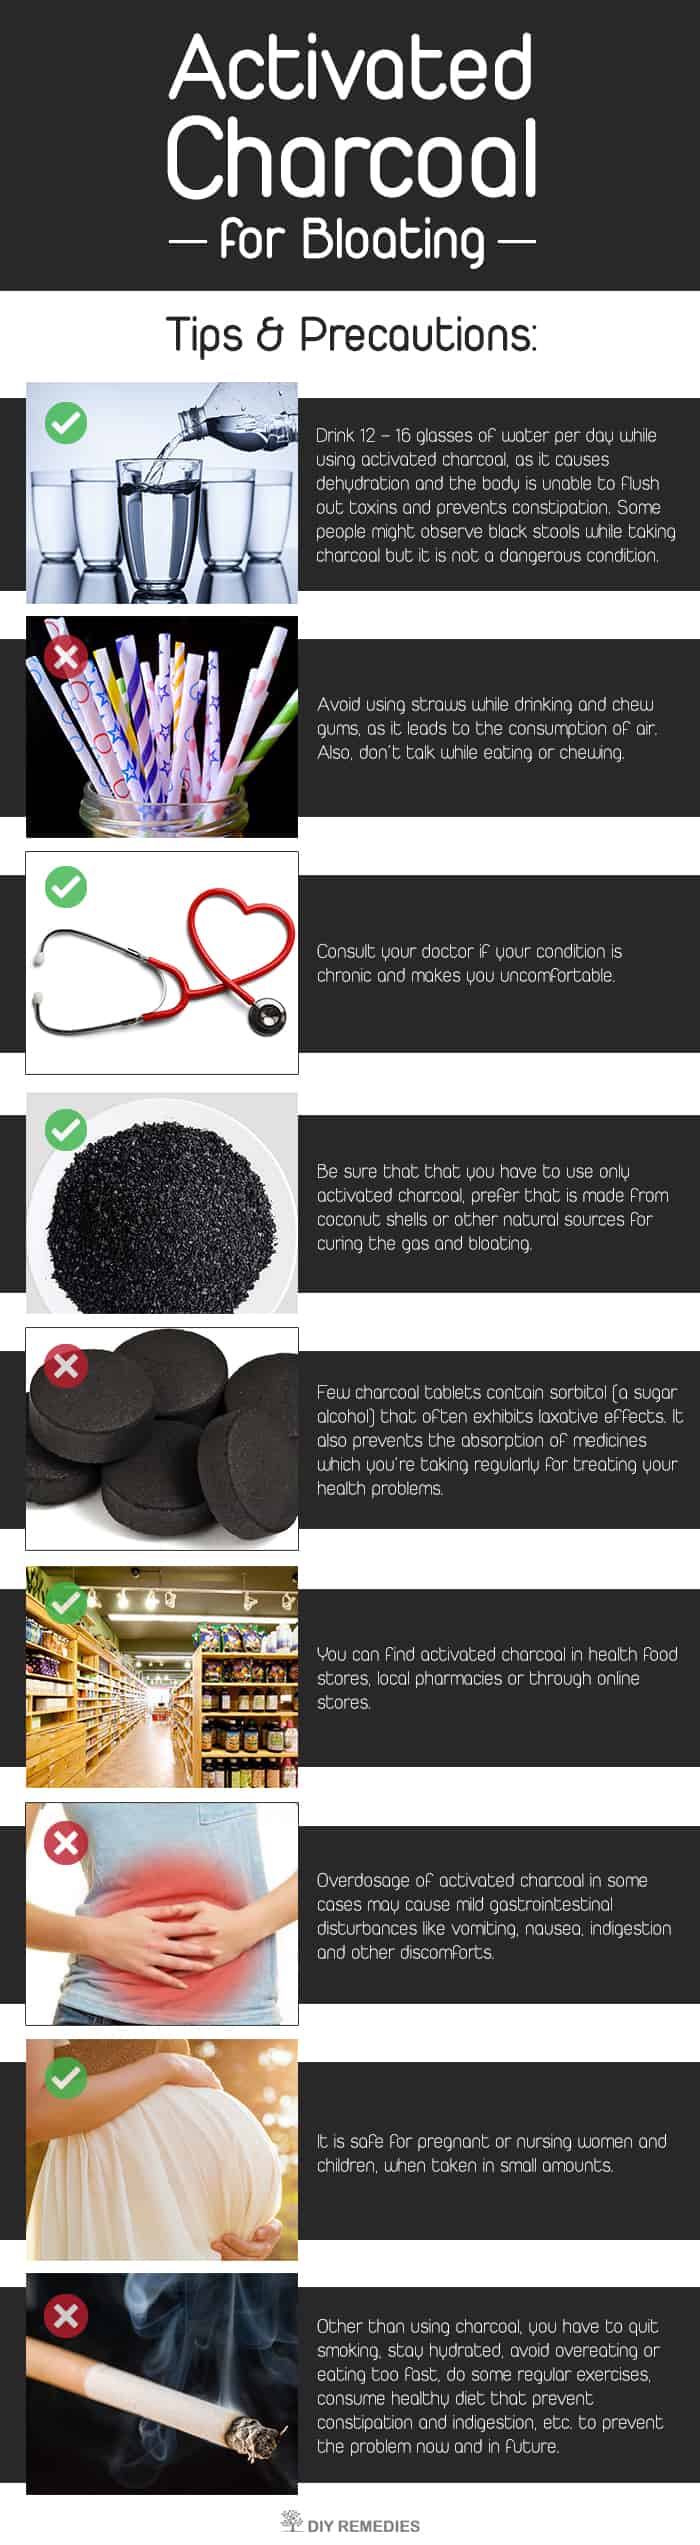 Activated-Charcoal-for-Bloating